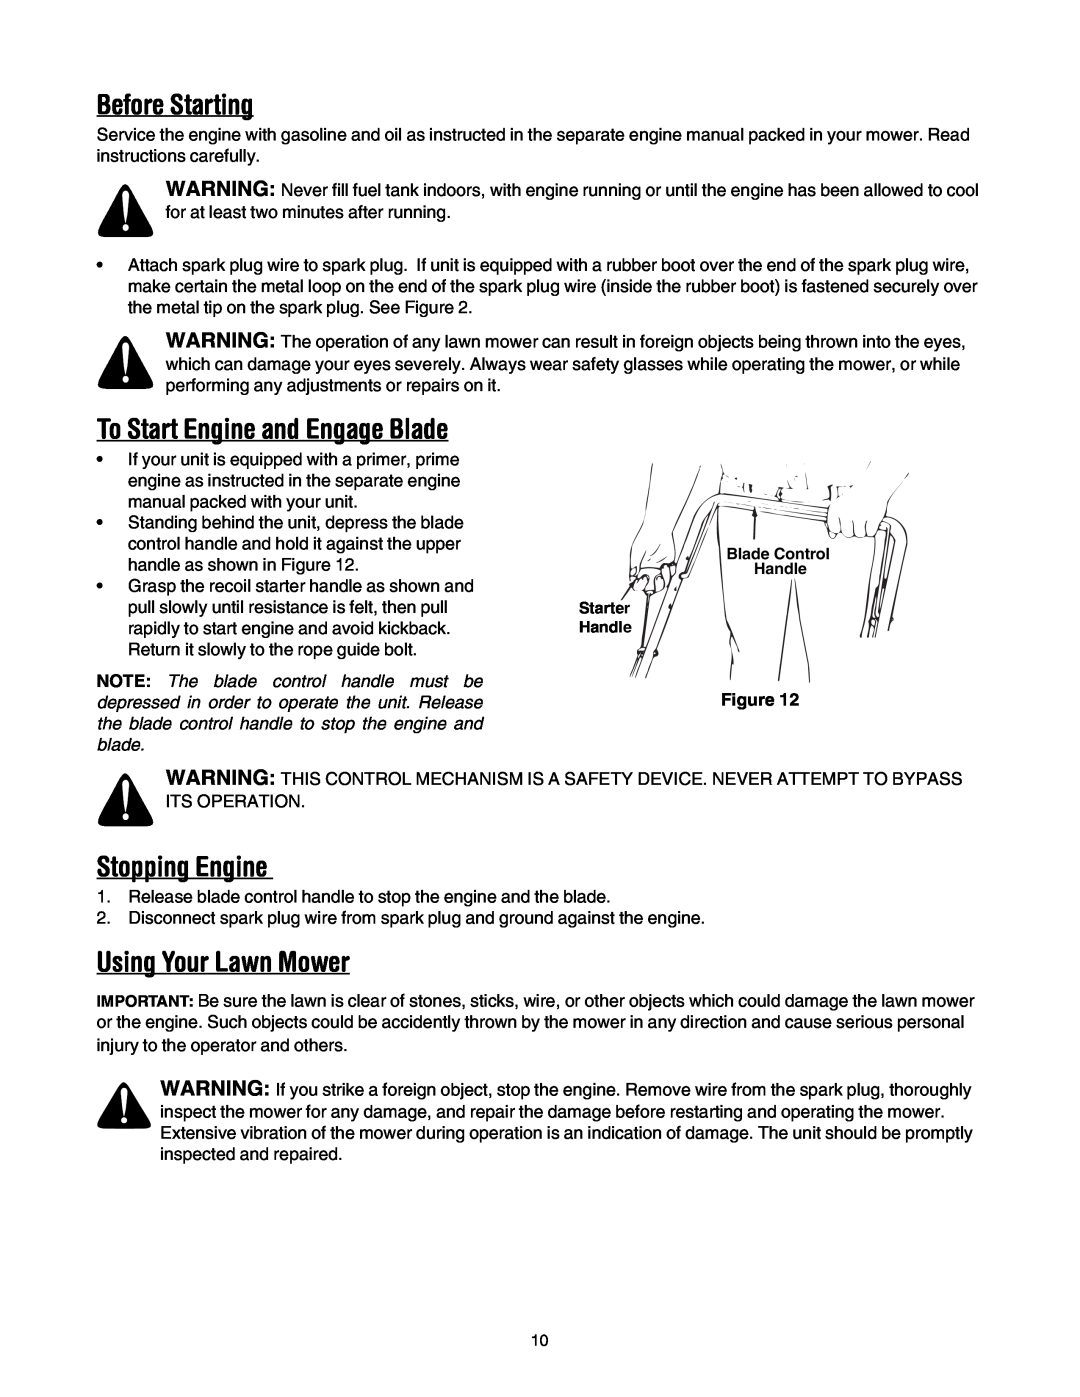 MTD 20 manual Before Starting, To Start Engine and Engage Blade, Stopping Engine, Using Your Lawn Mower 